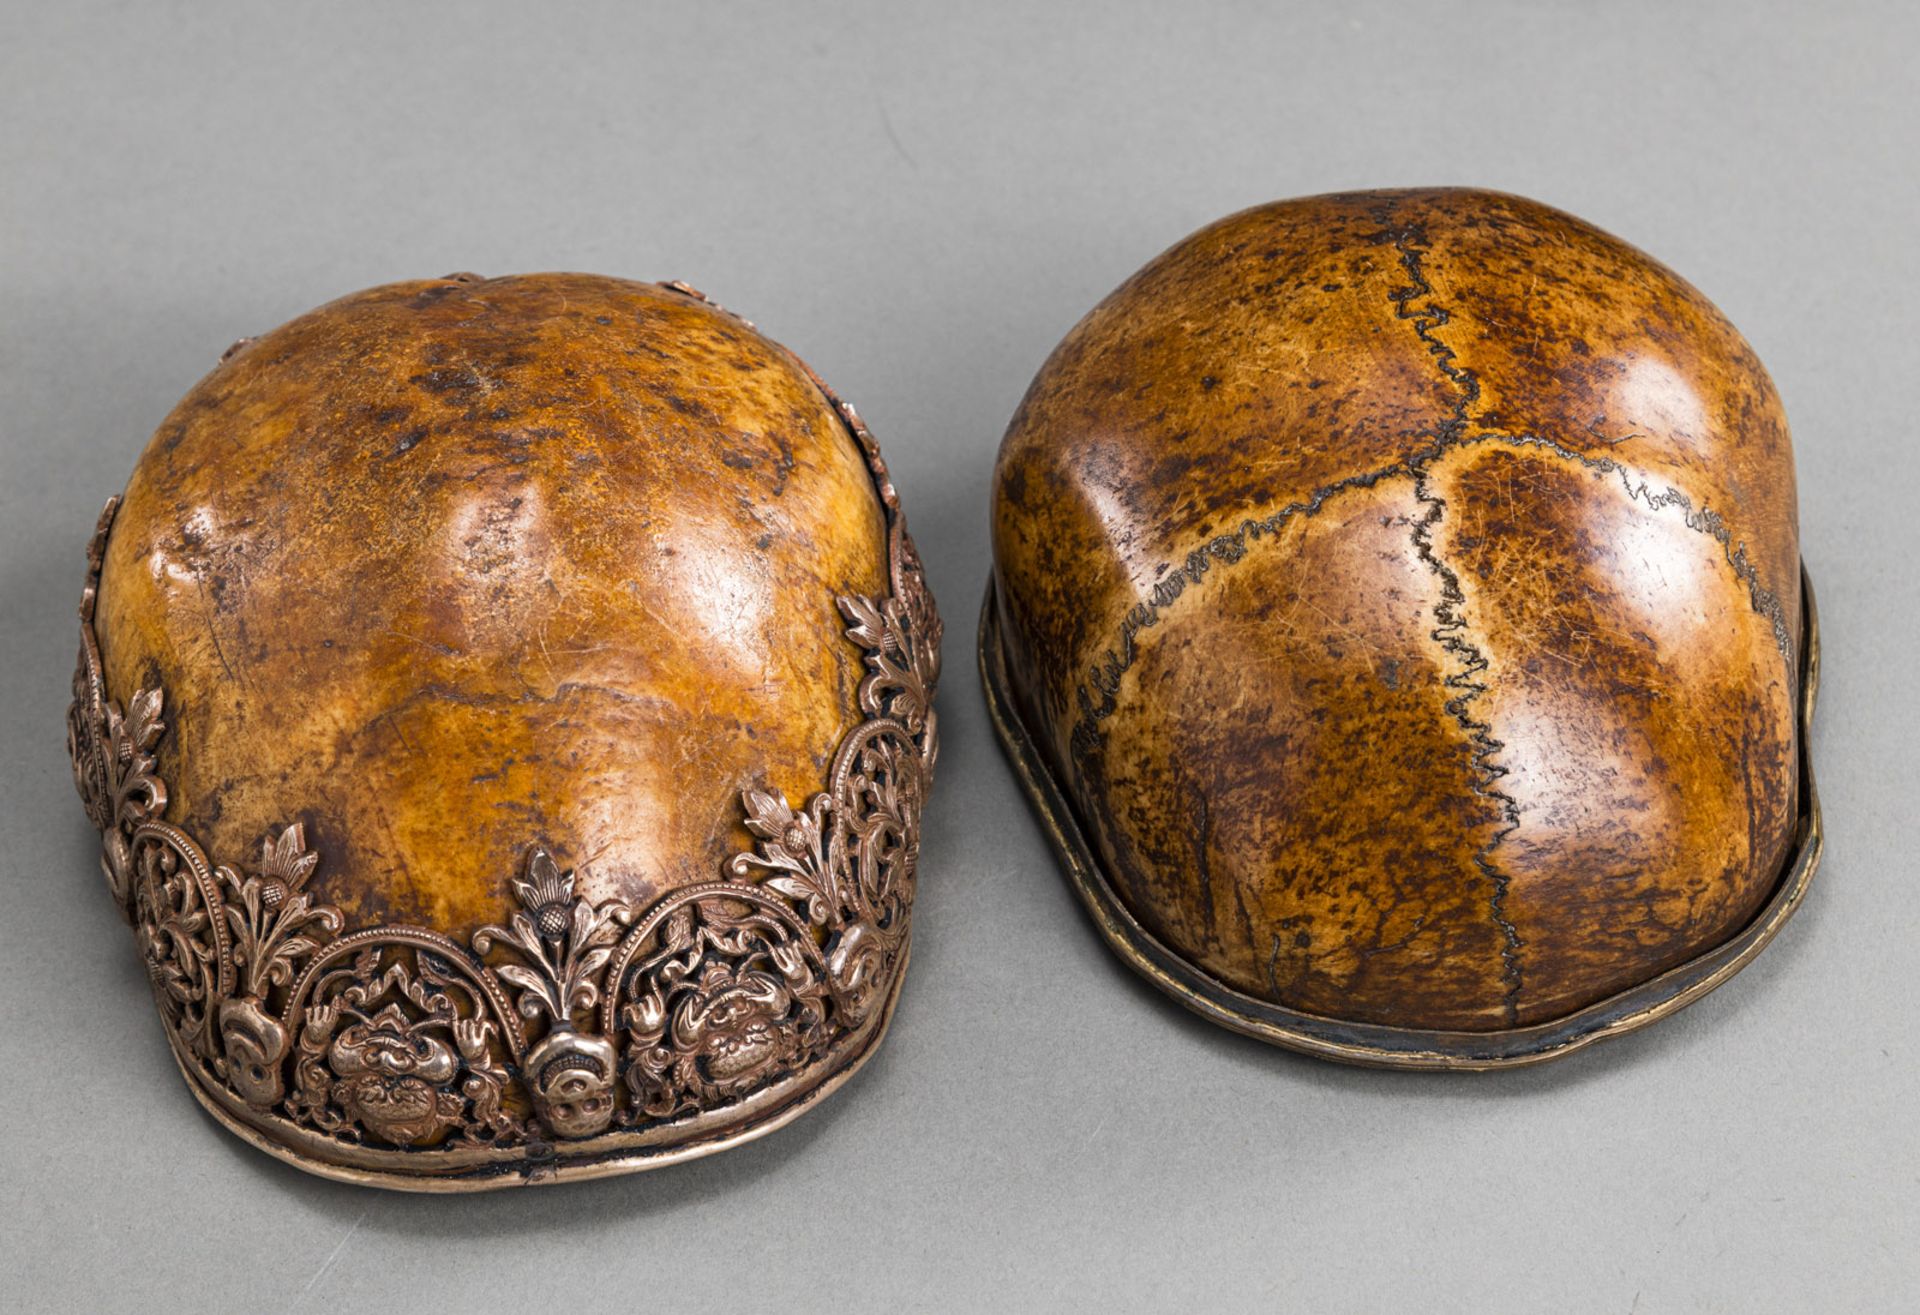 TWO MOUNTED KAPALA, PARTLY WORKED IN SILVER OR GILT-COPPER ON STANDS - Image 4 of 4